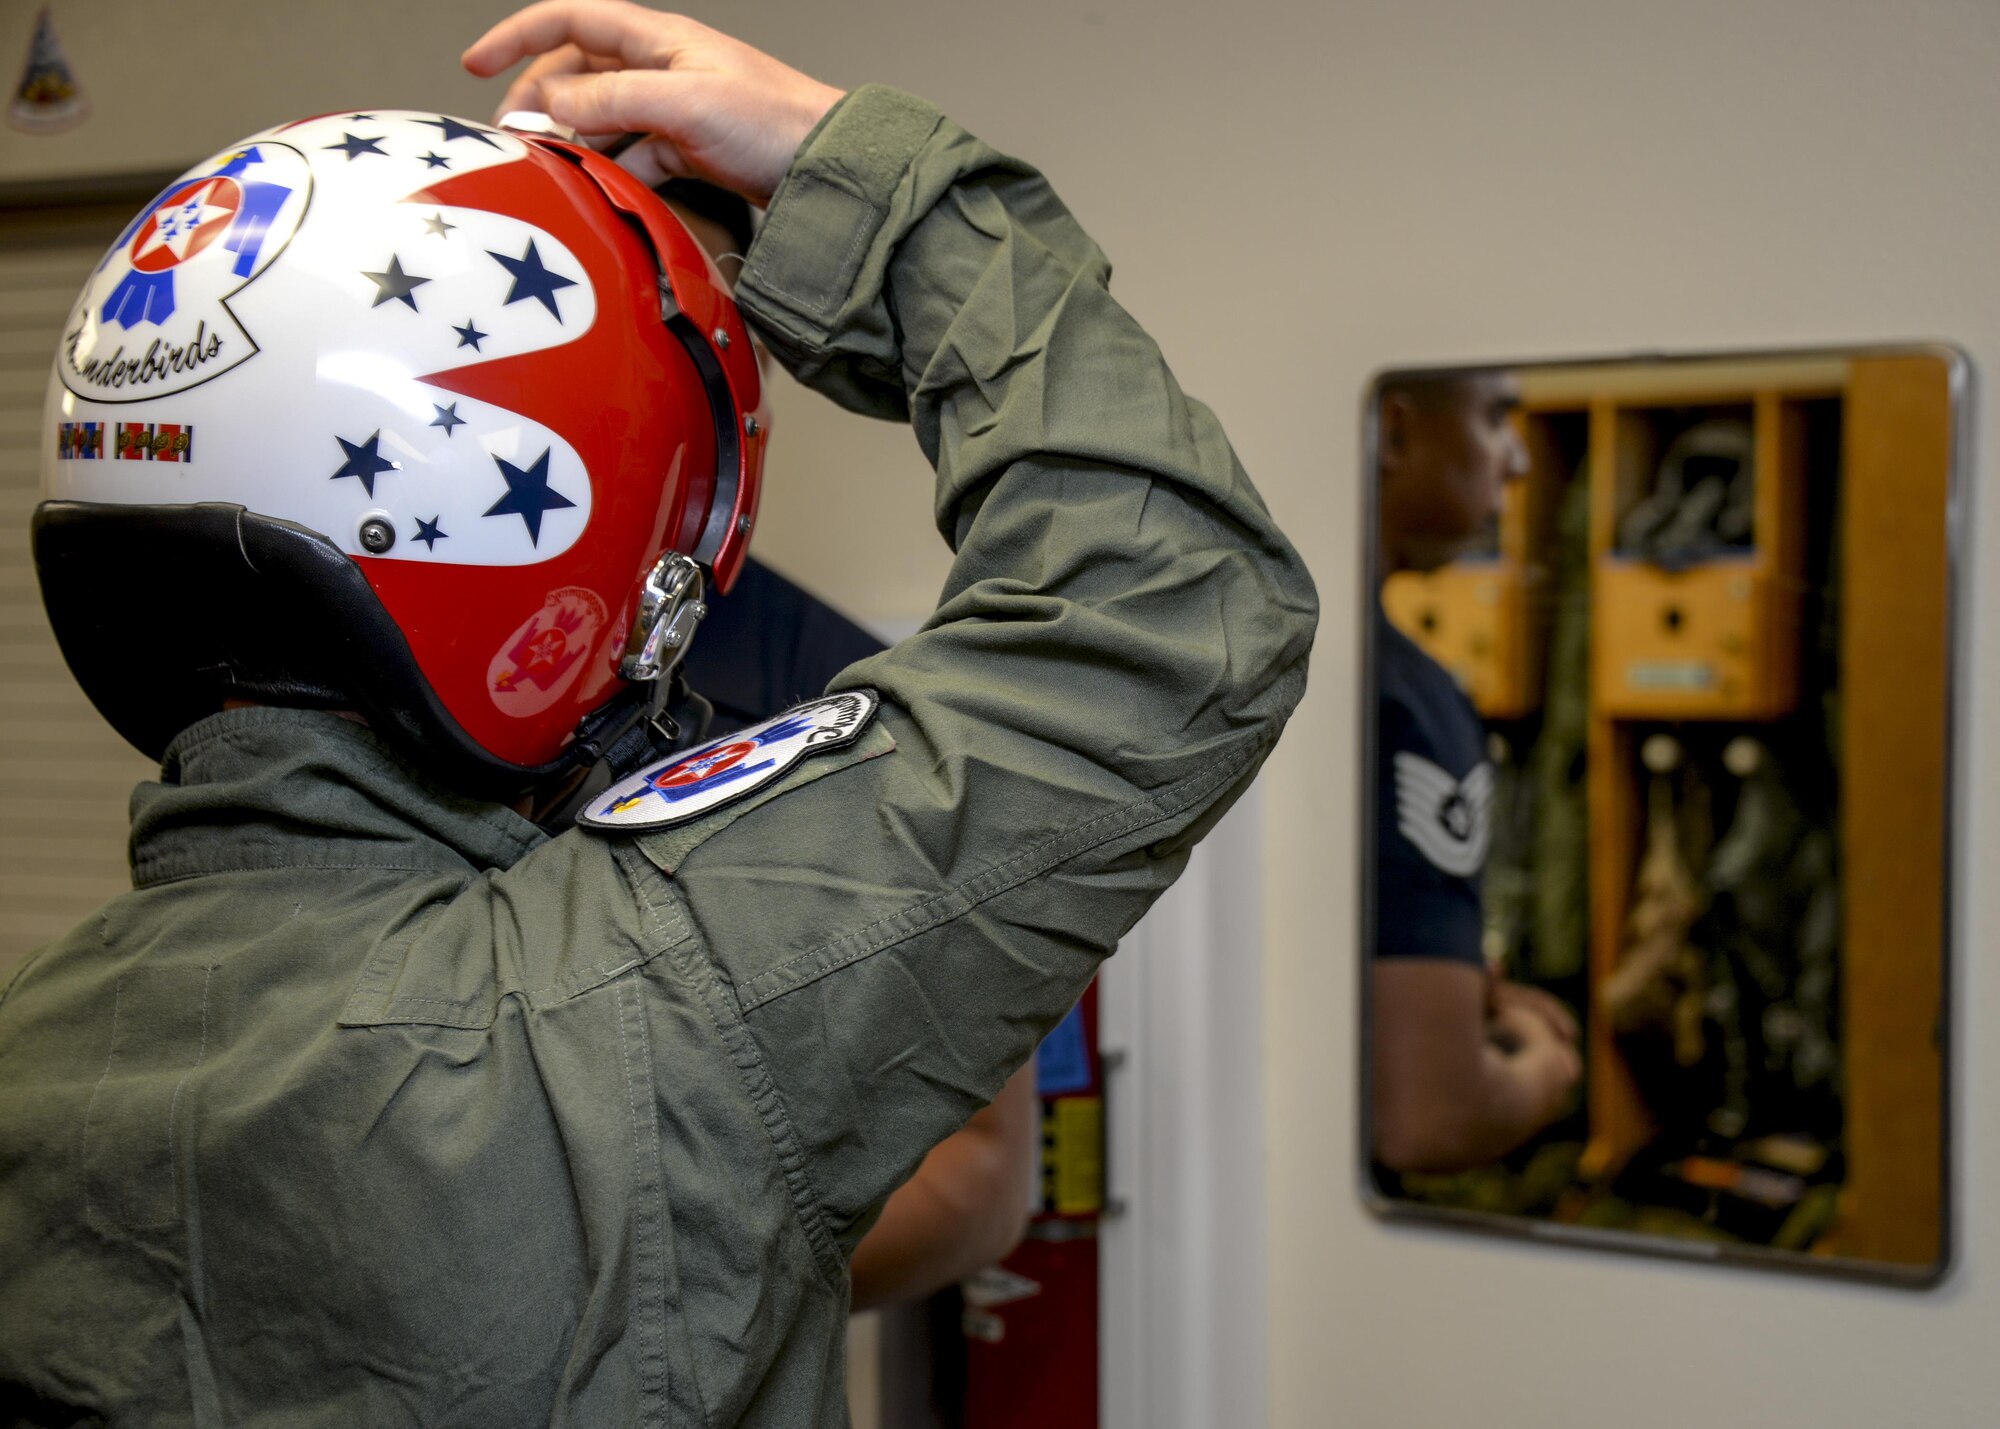 Brendan Lyons, Tucson community hometown hero, works with U.S. Air Force Tech. Sgt. Paul Rosales, aircrew flight equipment specialist with the U.S. Air Force Air Demonstration Squadron, to ensure a secure fit of a helmet and oxygen mask at Davis-Monthan Air Force Base, Ariz., March 11, 2016.  Lyons was nominated as a hometown hero to fly with the Thunderbirds because of his commitment to safety and his passion to make Tucson a safer community for cyclists and motorists.  (U.S. Air Force photo by Senior Airman Chris Massey/Released)